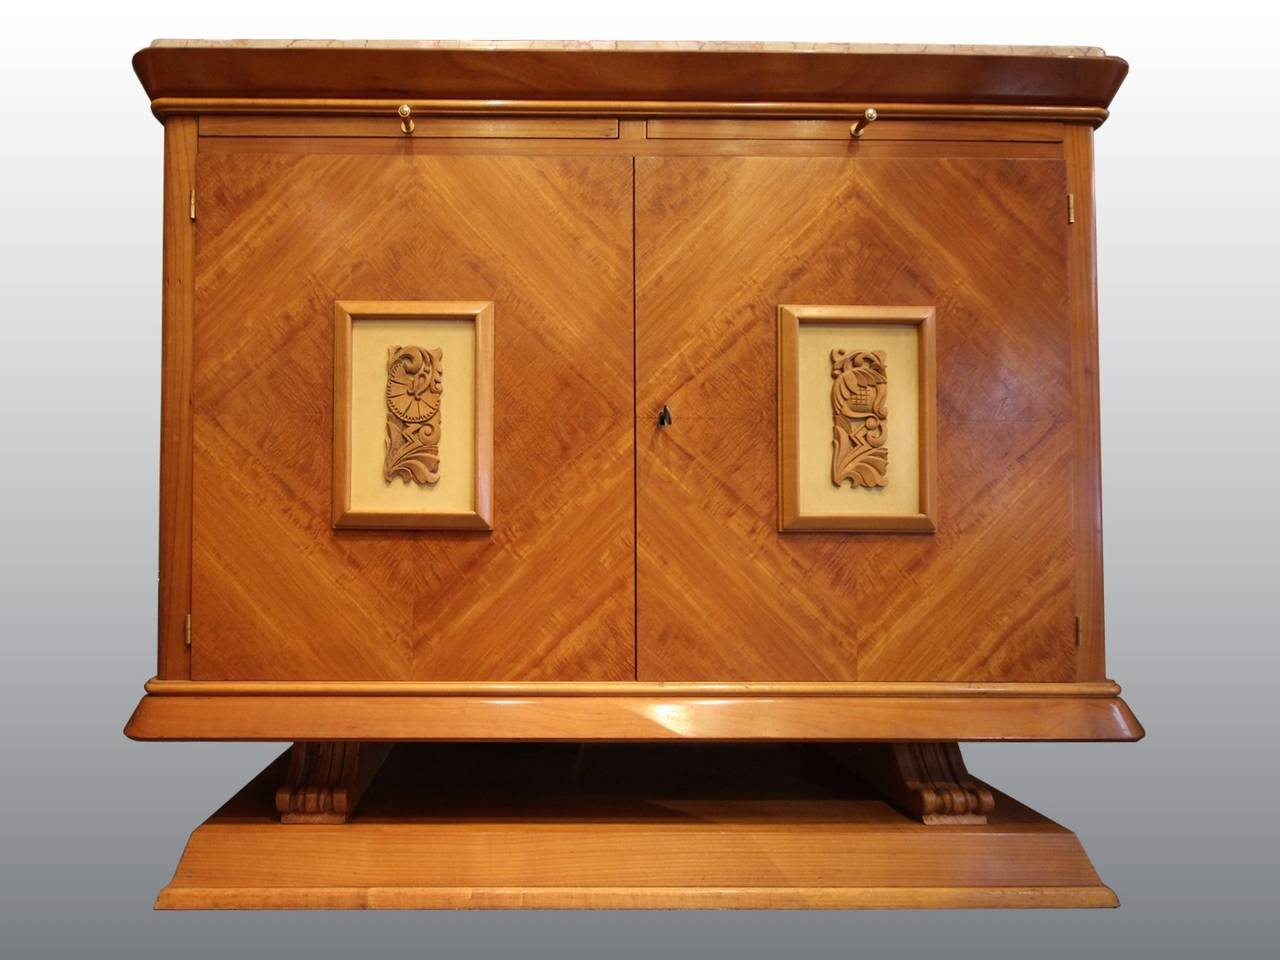 Lovely 1940s cabinet in sycamore with two pull tabs. The doors are adorned with two panels in carved wood. Original top in marble. Interior and shelves in mahogany veneer.